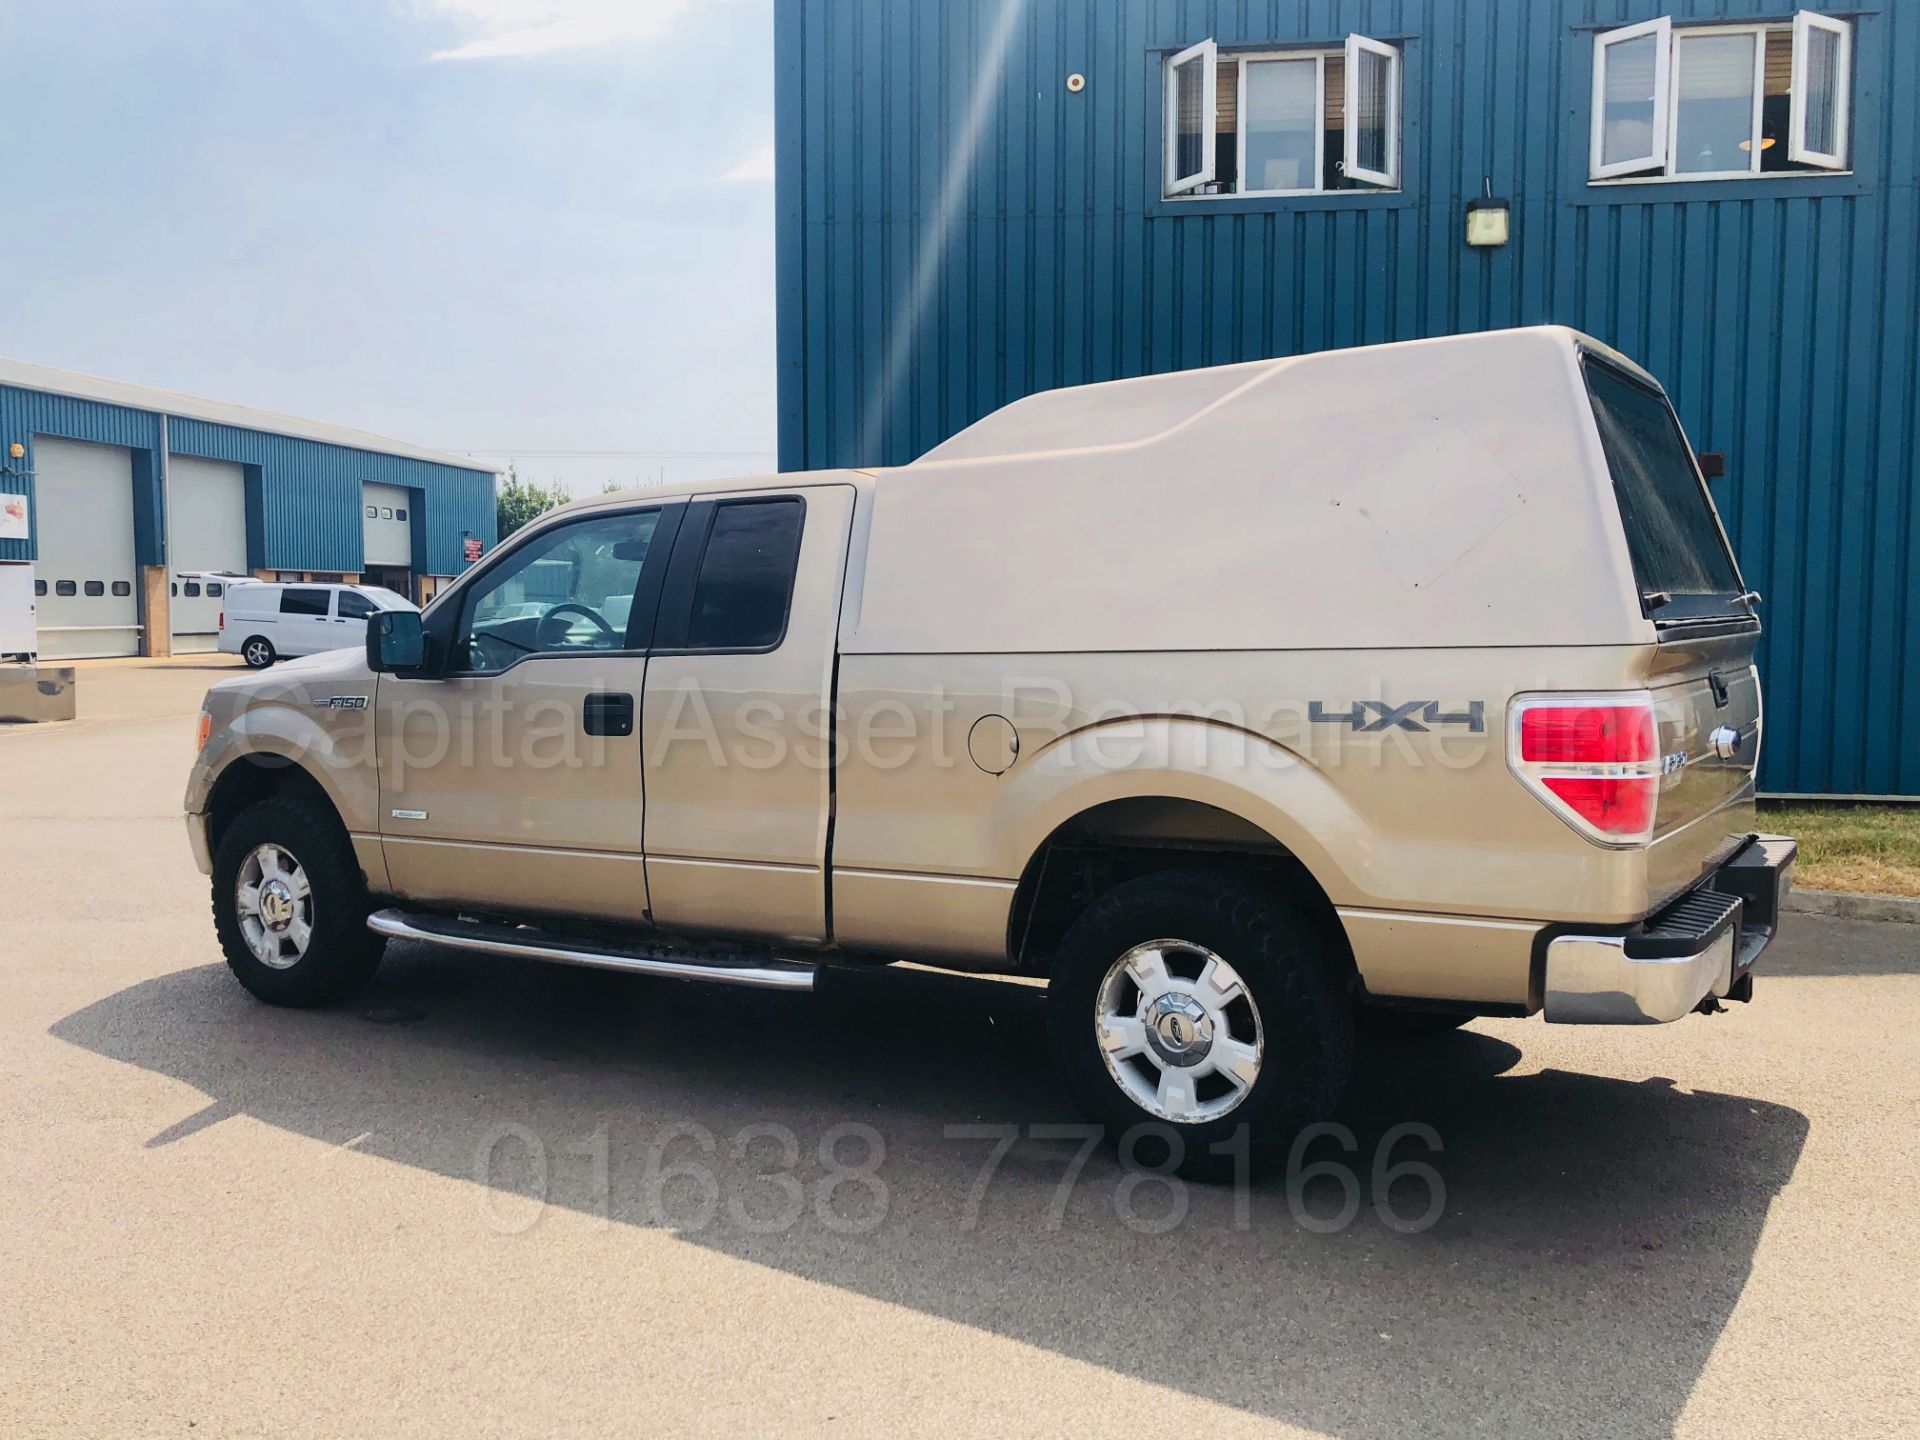 (On Sale) FORD F-150 5.4 V8 XLT EDITION KING-CAB (2012) MODEL**4X4**6 SEATER**AUTOMATIC *TOP SPEC* - Image 20 of 52